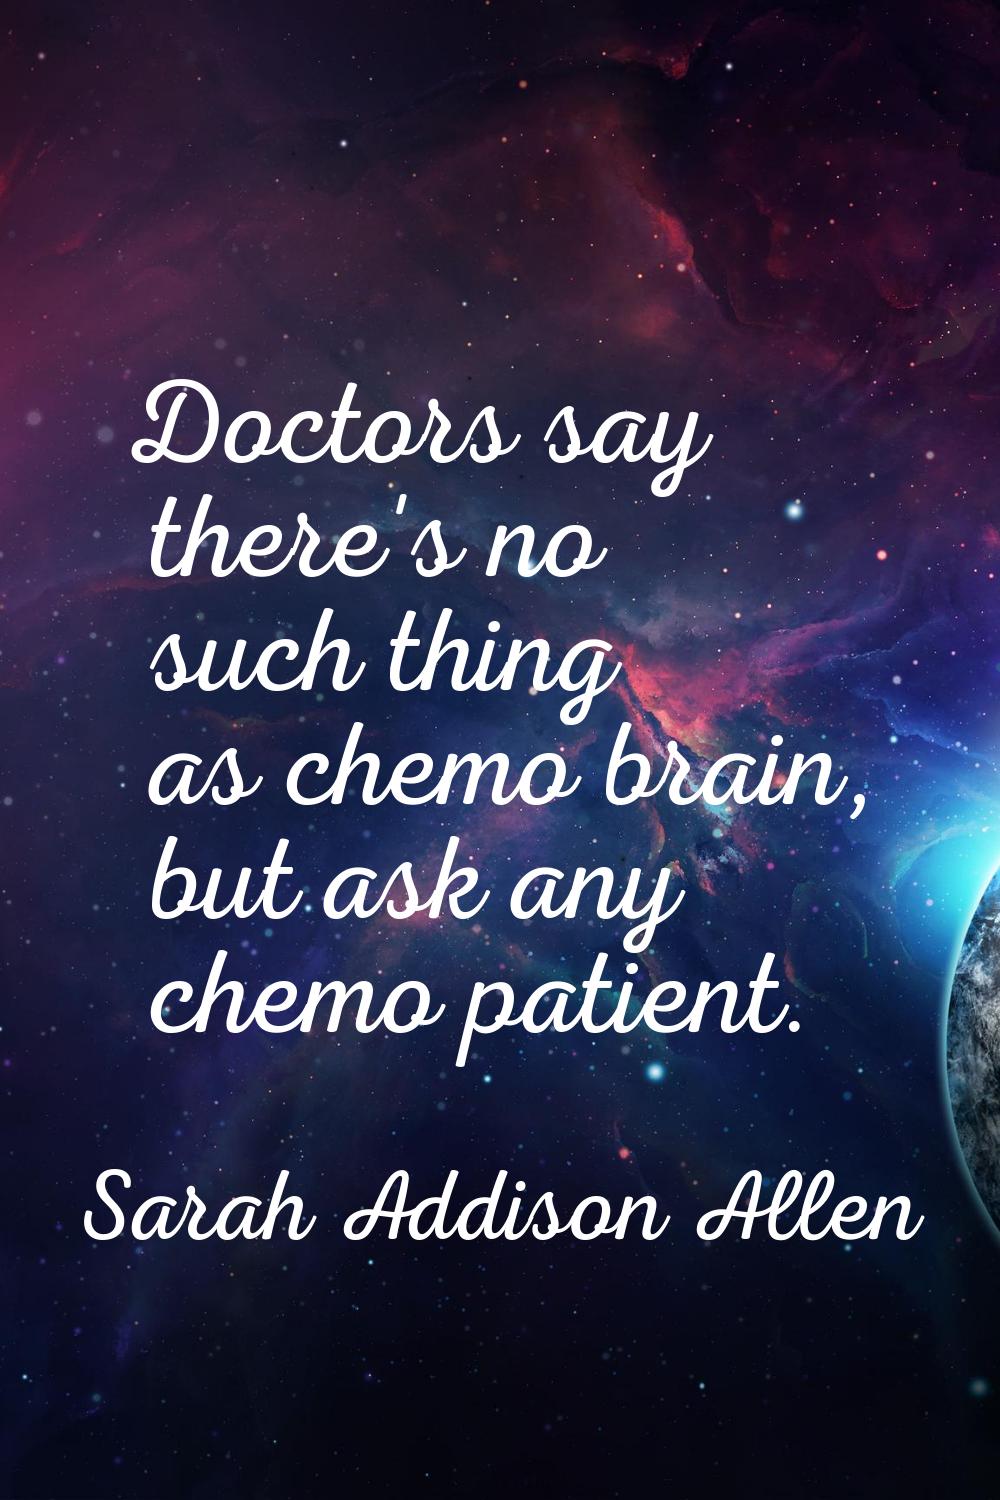 Doctors say there's no such thing as chemo brain, but ask any chemo patient.